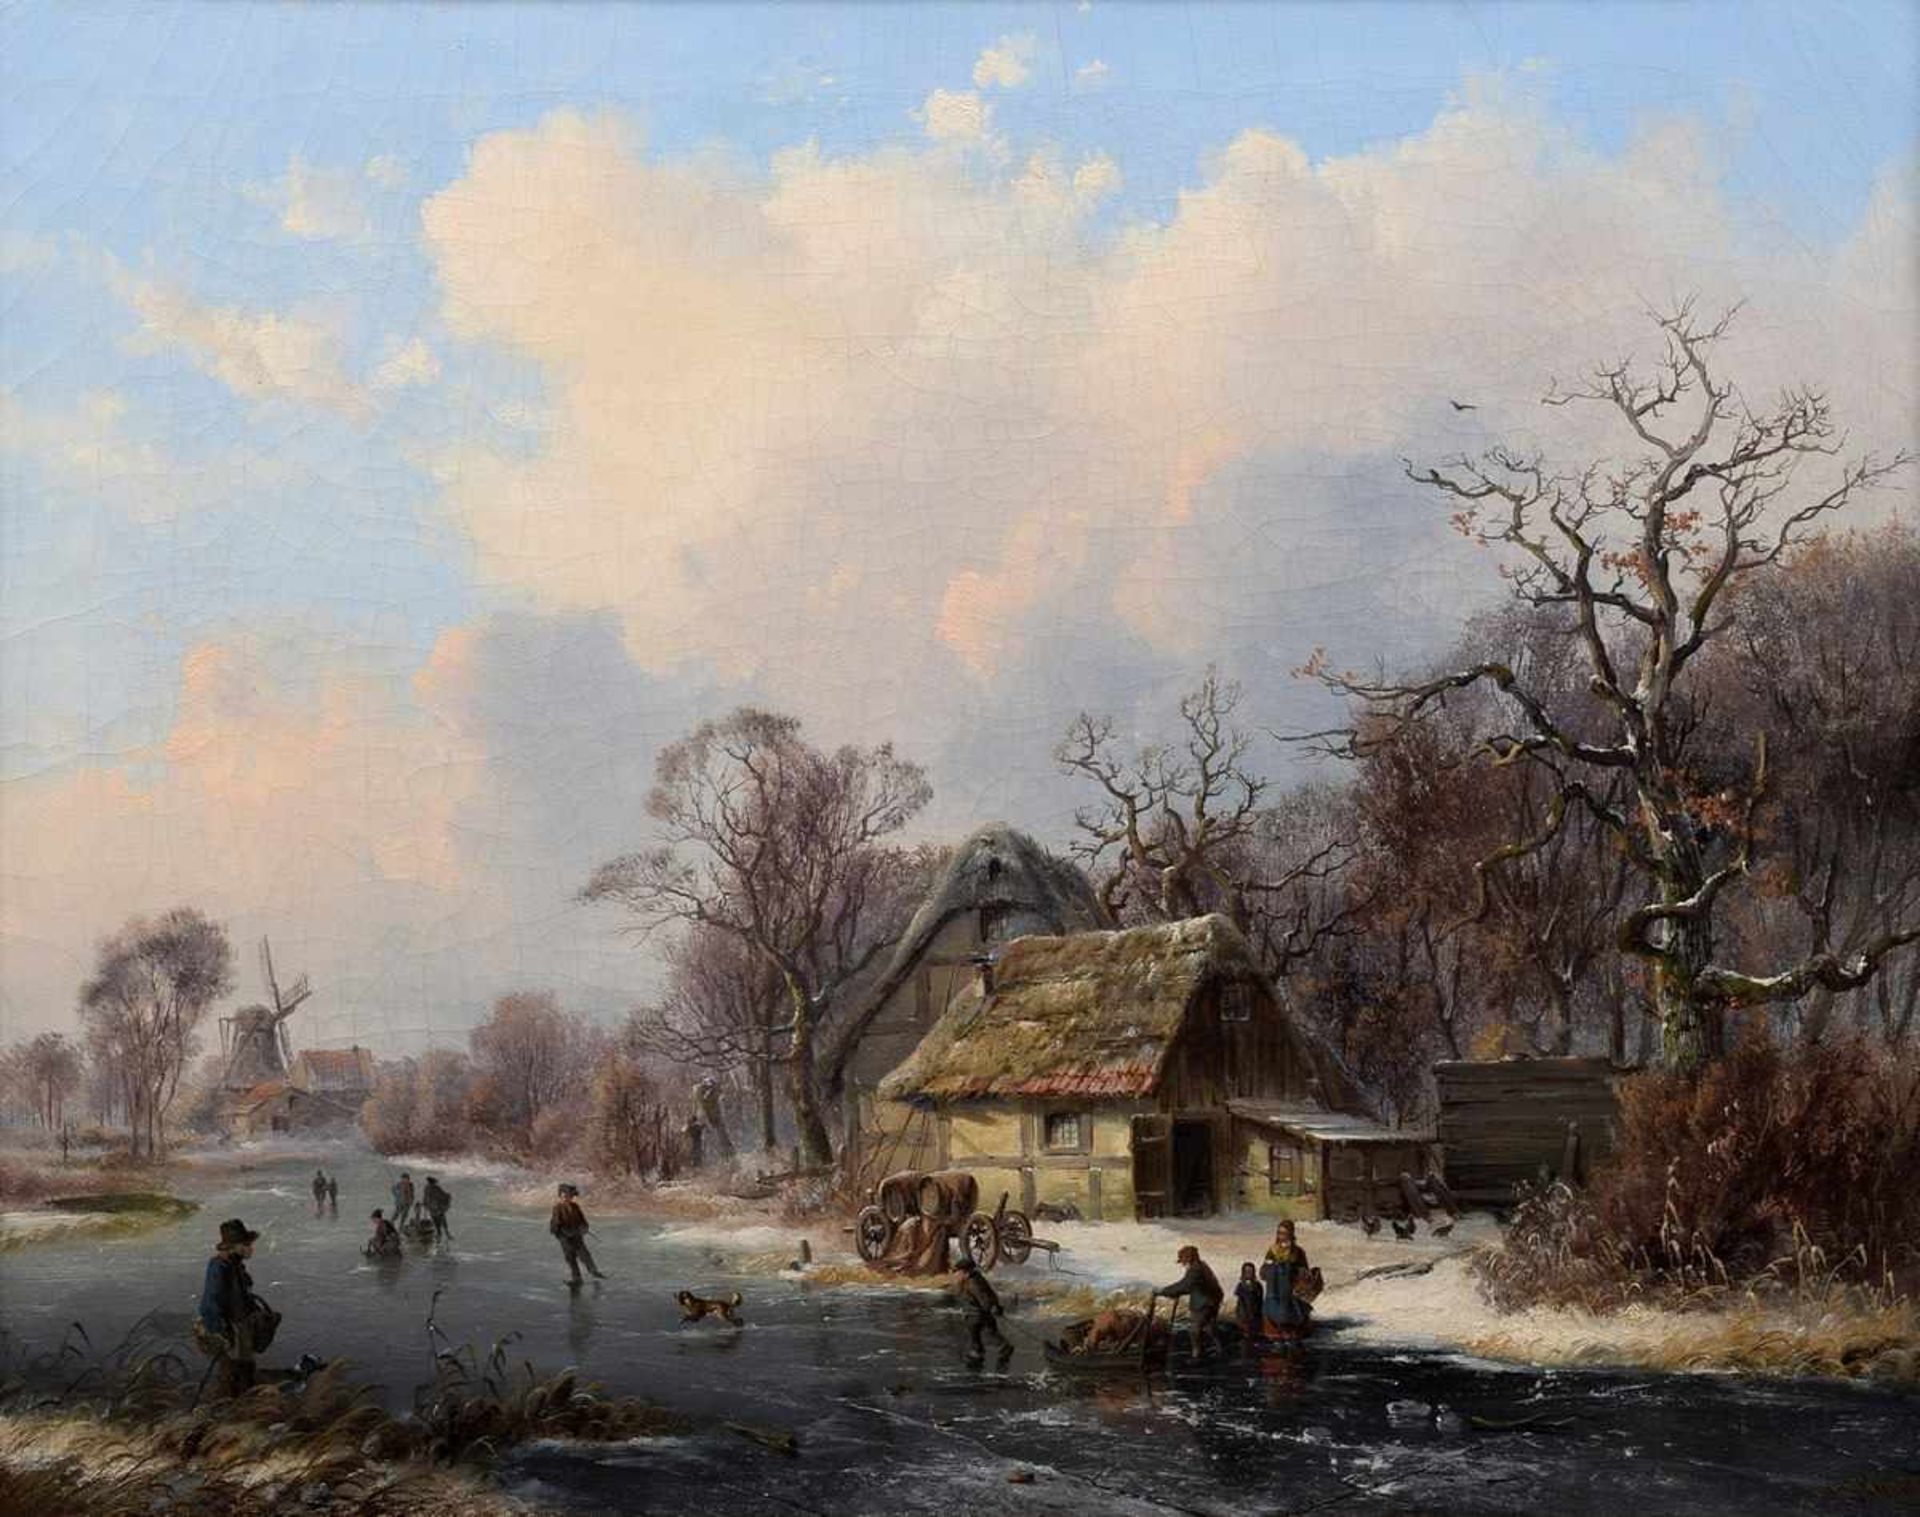 Köster, Carl Georg (1812-1893) "Winter landscape with ice skaters", oil/canvas, signed lower